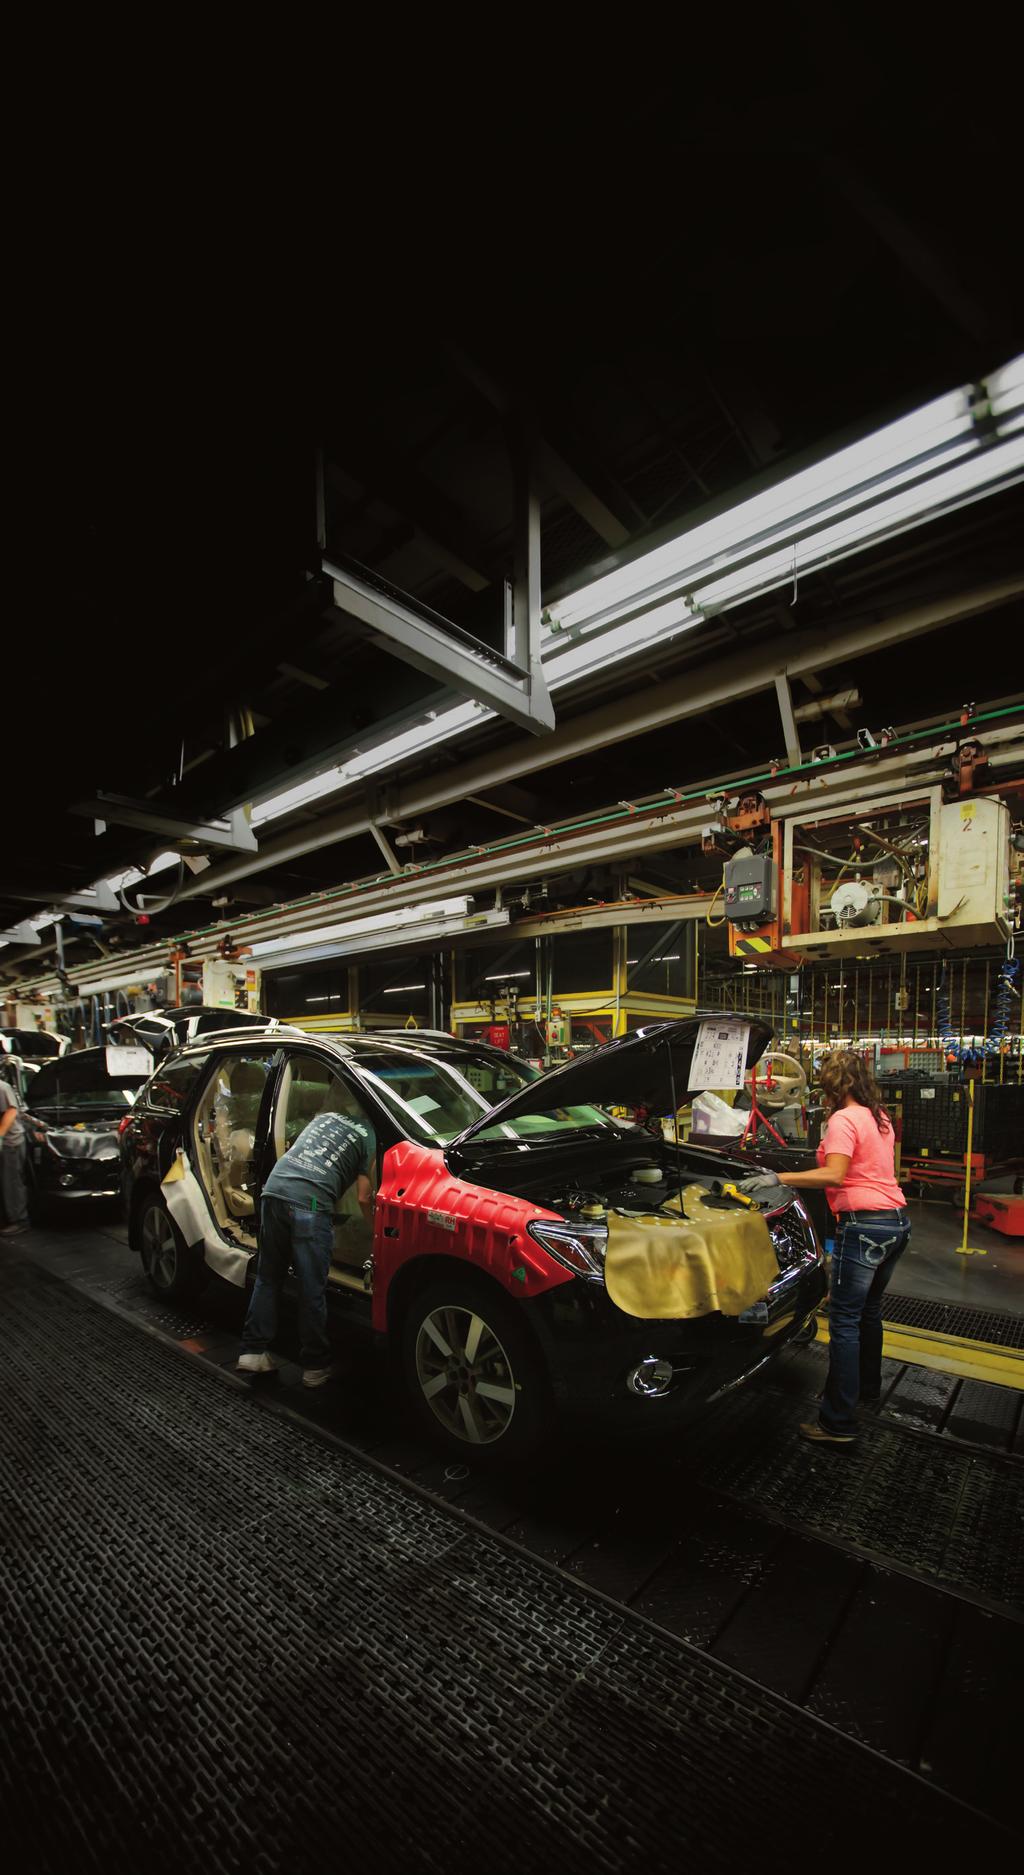 THE TENNESSEE AUTOMOTIVE INDUSTRY THE TENNESSEE AUTOMOTIVE MANUFACTURING SECTOR The Southeast has emerged as the driving force in automotive manufacturing in the United States, and Tennessee is its